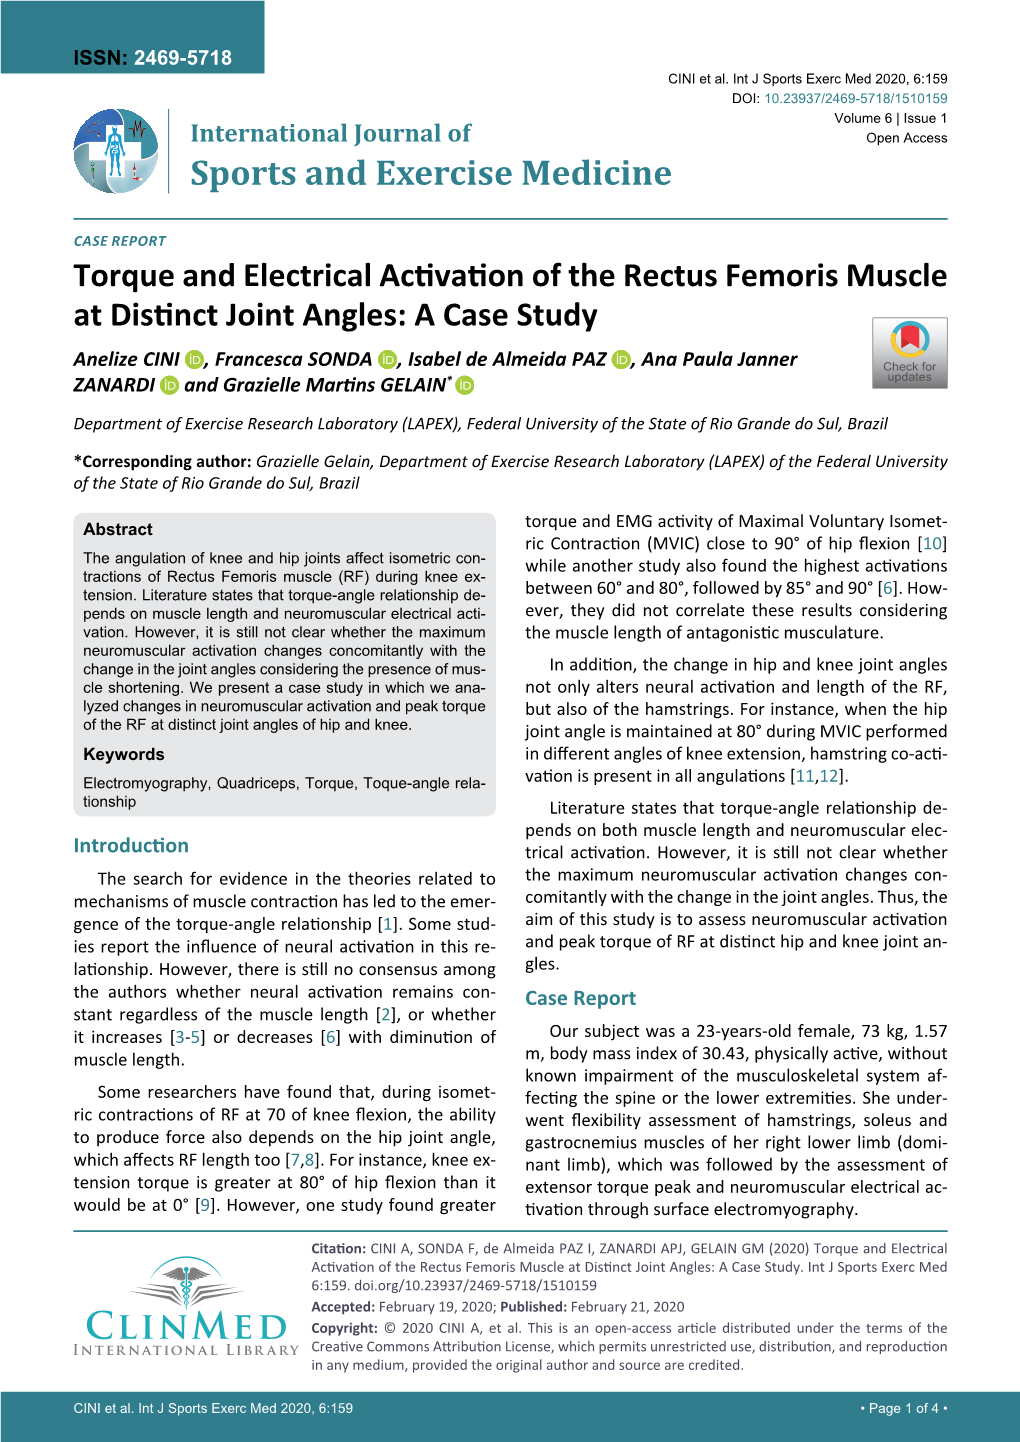 Torque and Electrical Activation of the Rectus Femoris Muscle at Distinct Joint Angles: a Case Study